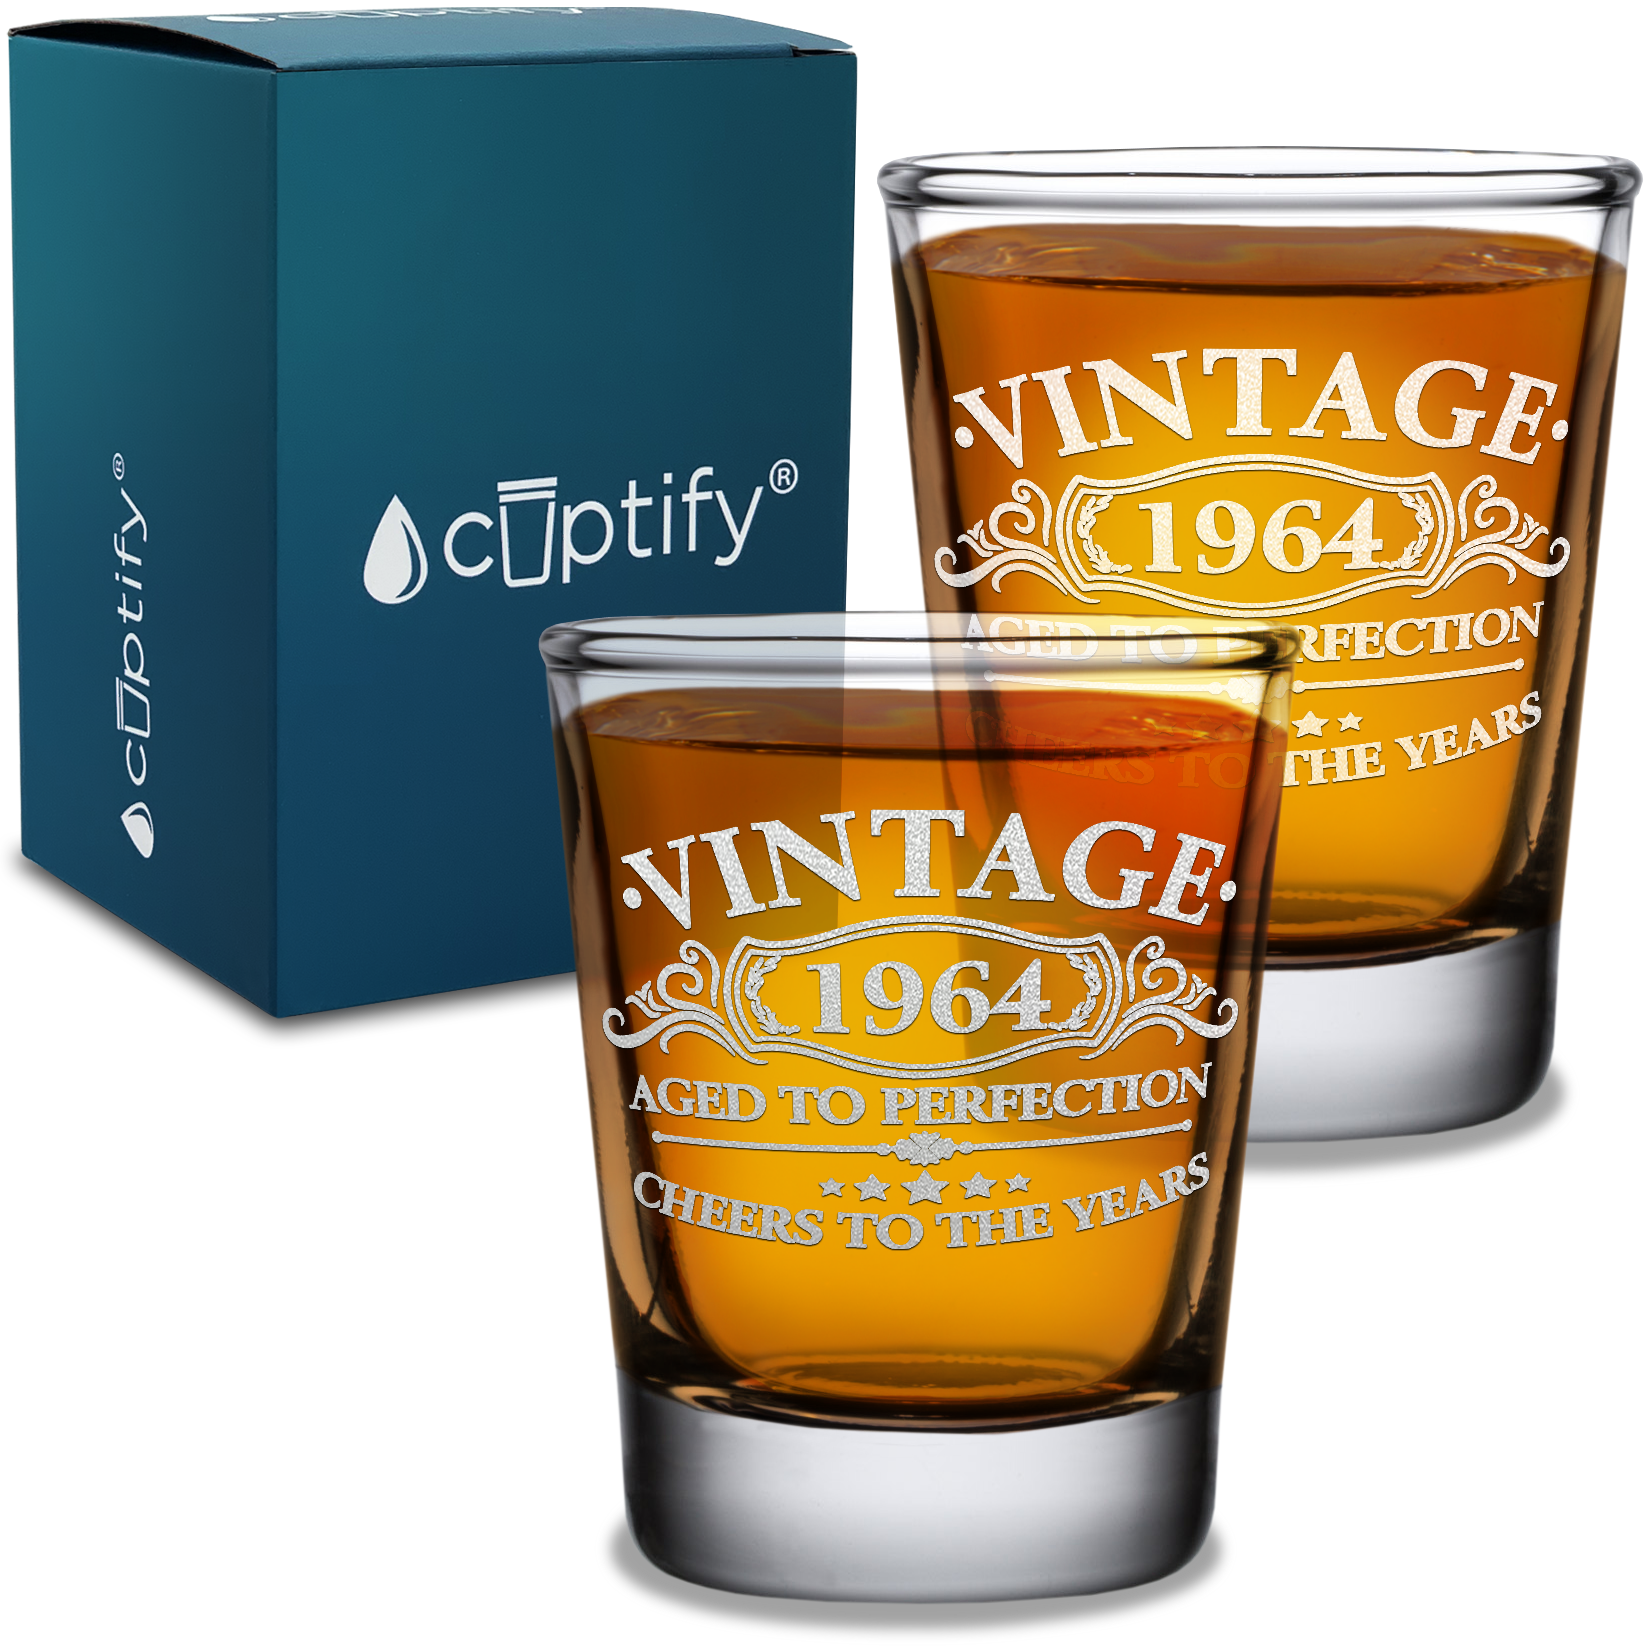 Vintage Aged To Perfection Cheers To 57 Years 1964 Laser Engraved on 2oz Shot Glasses - Set of 2